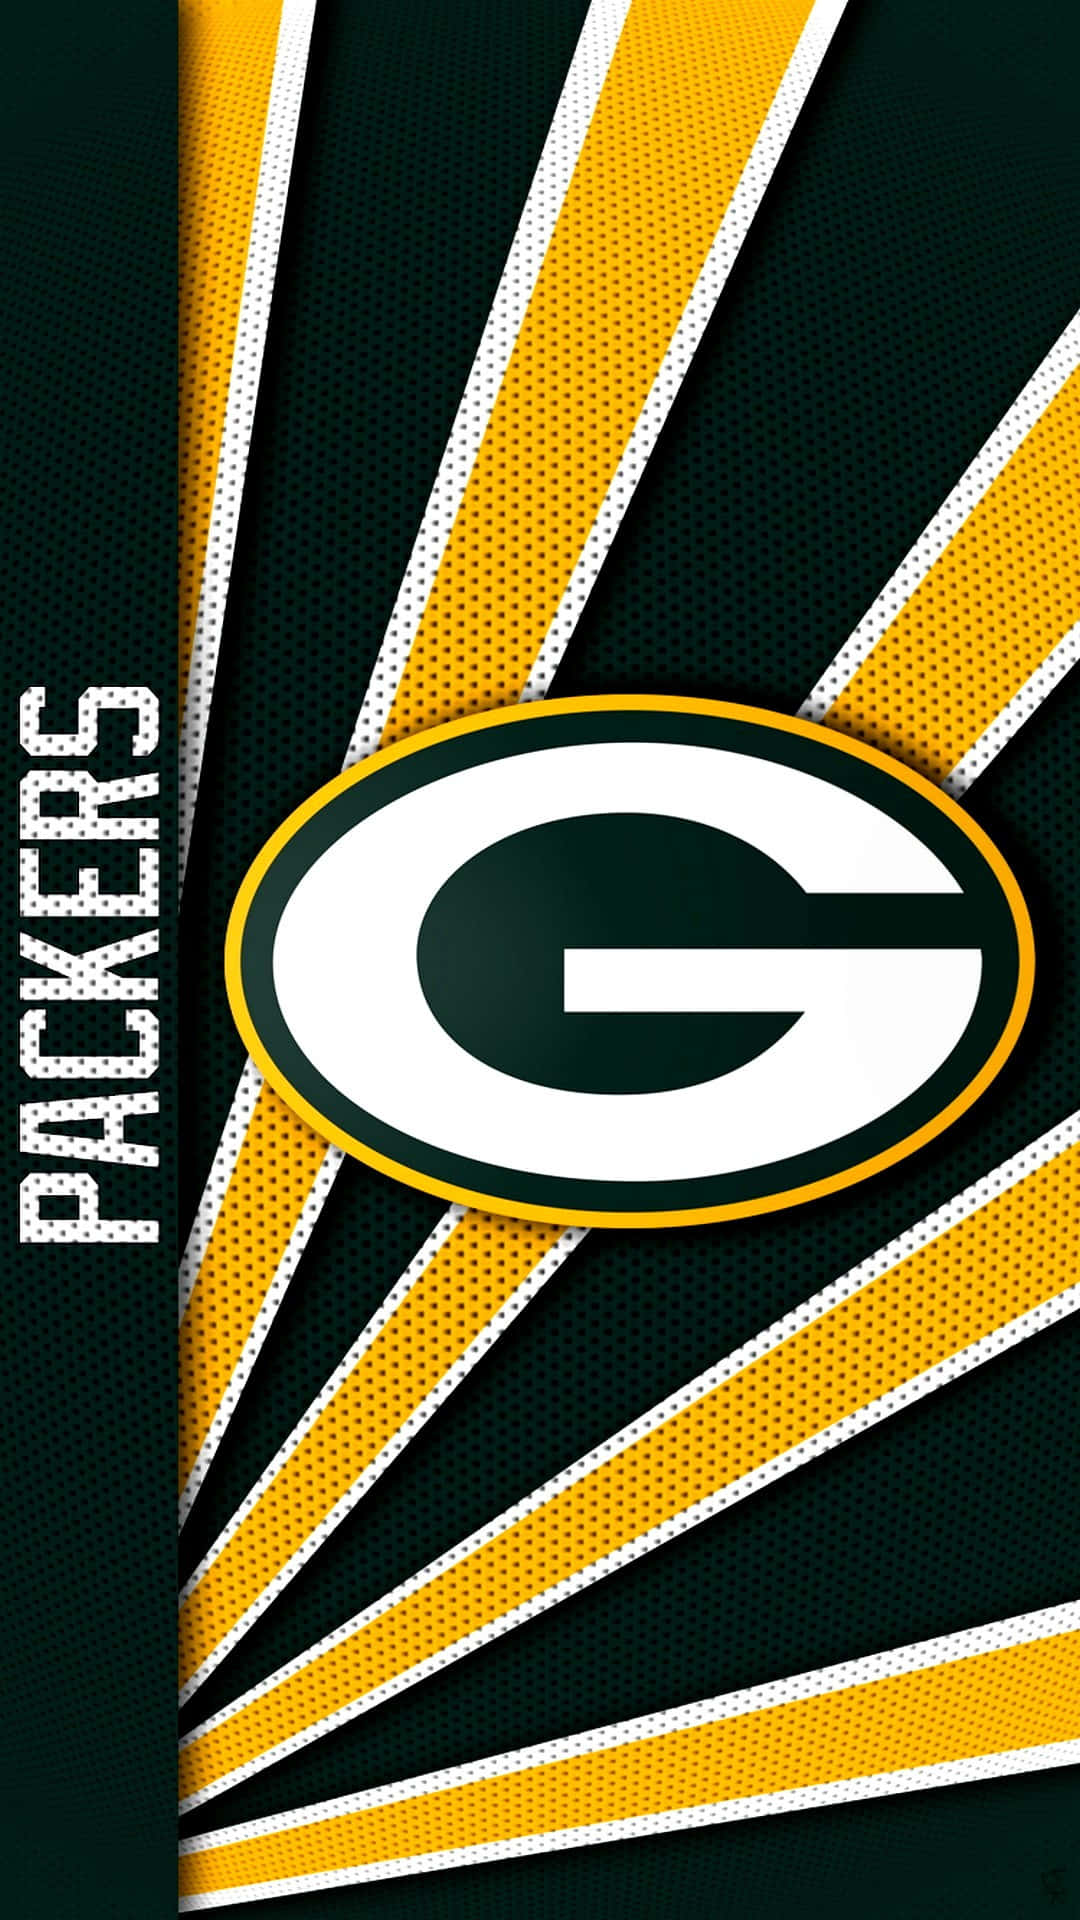 Green Bay Packers logo on a vibrant green background